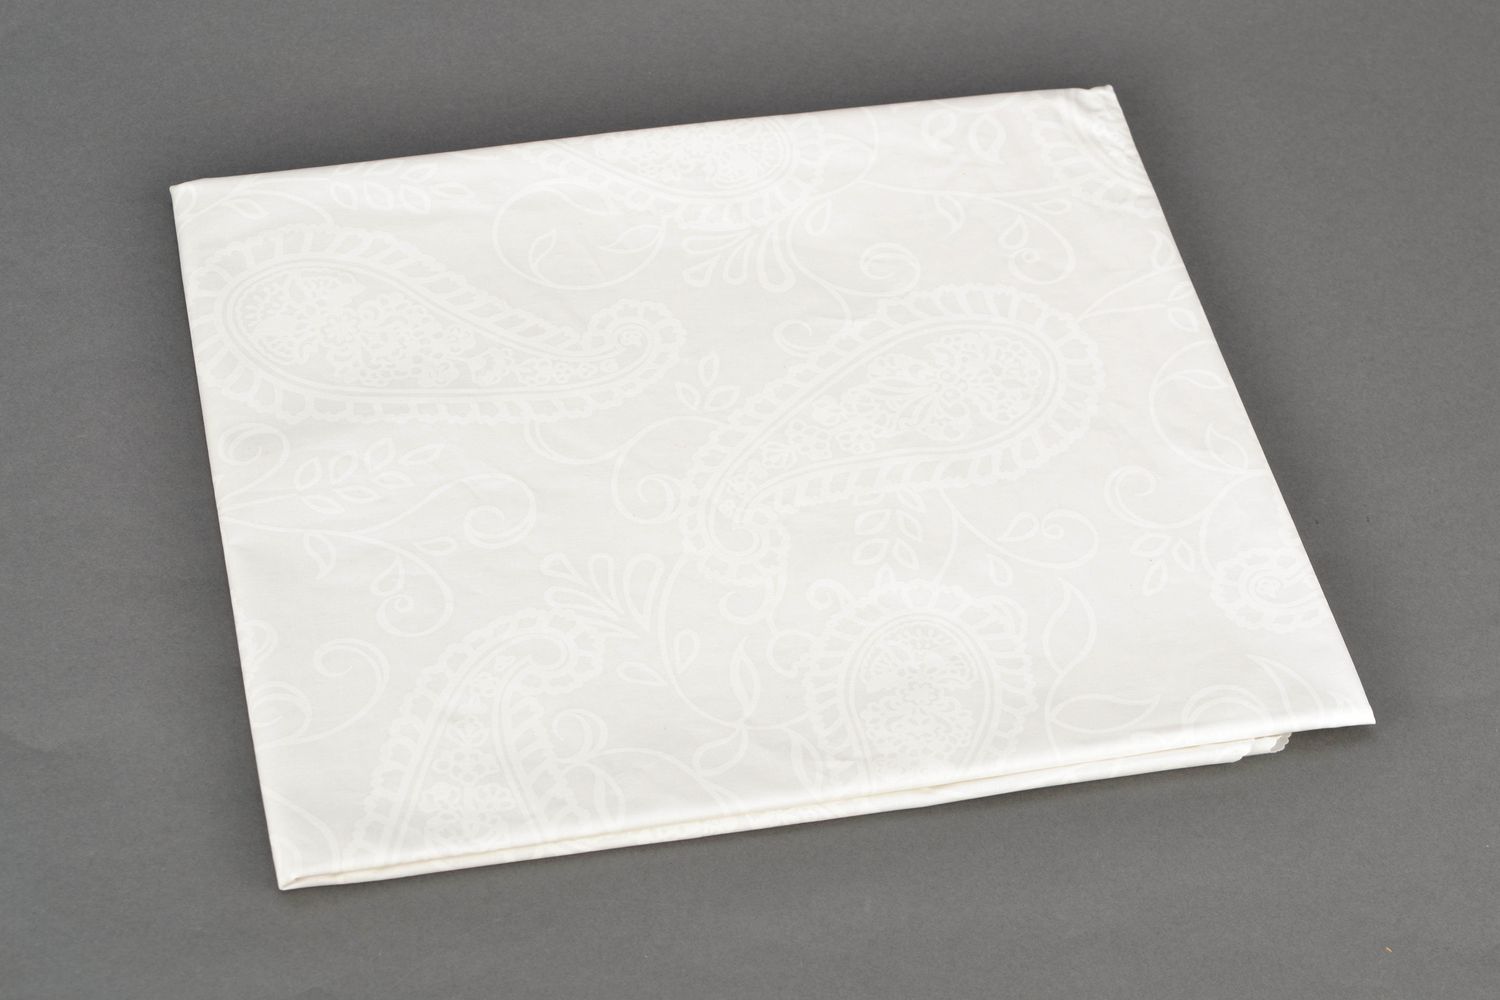 White ornamented tablecloth photo 4